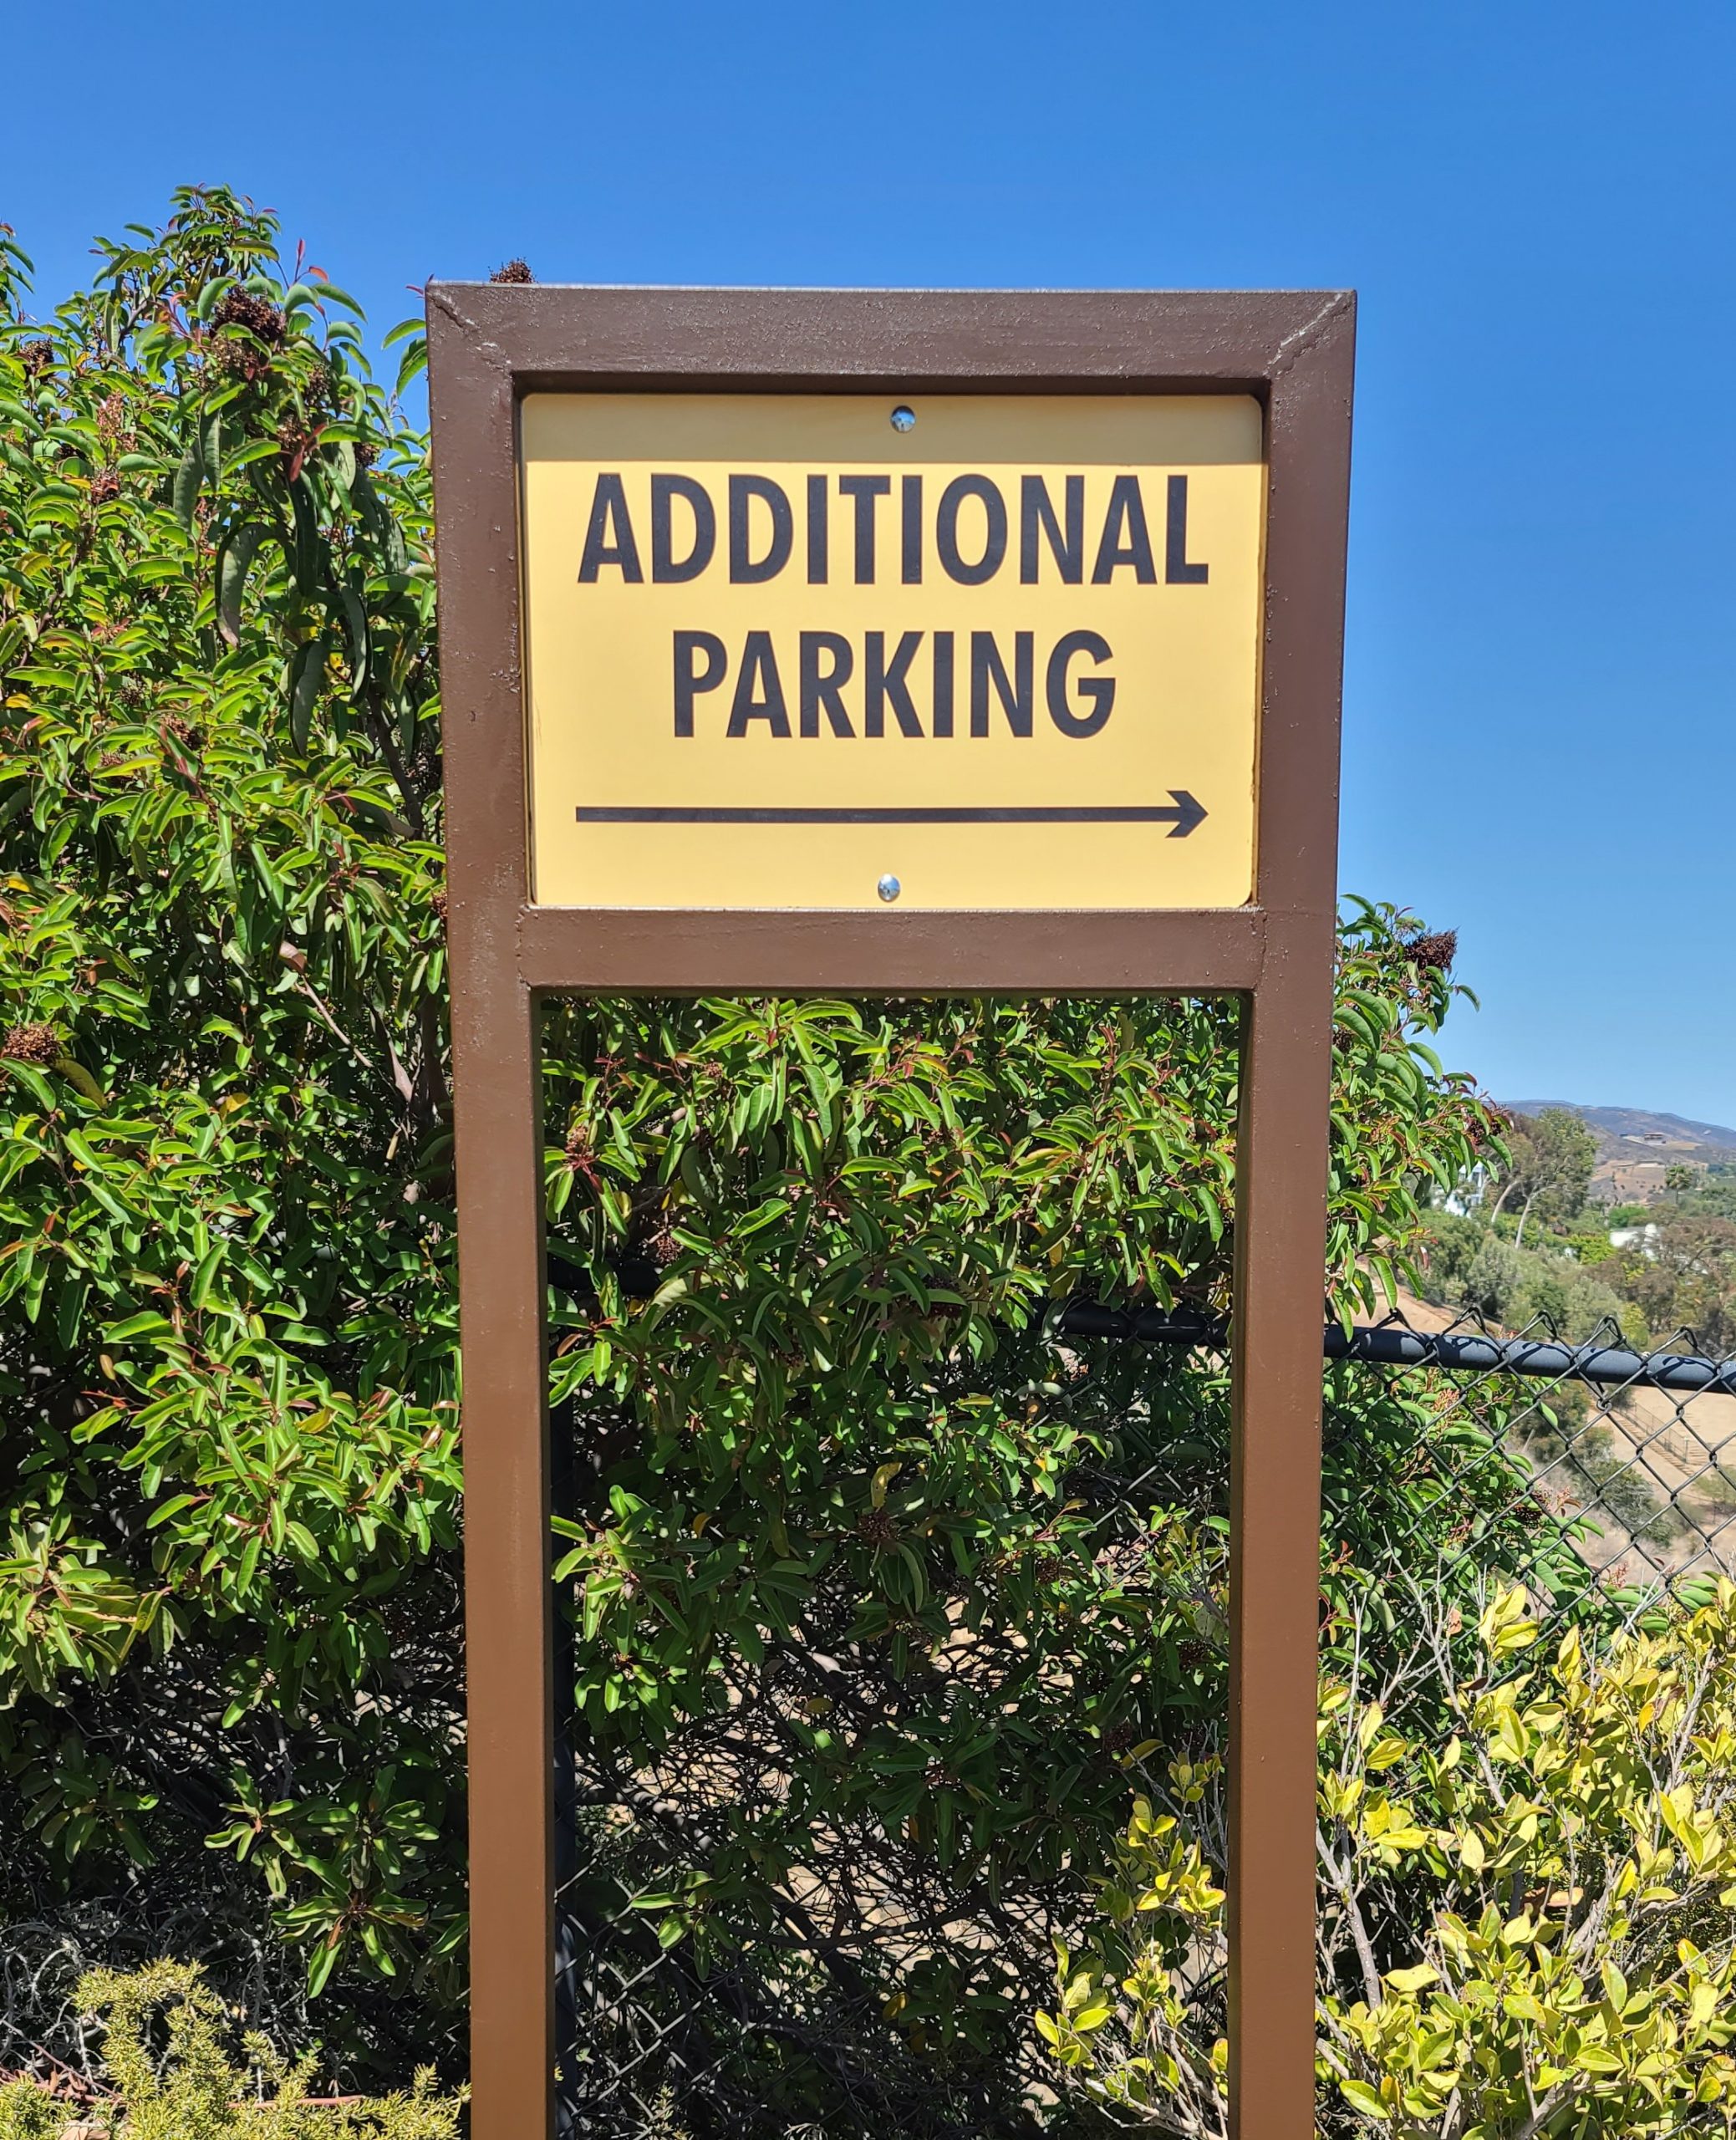 These additional parking signs for Malibu Pacific Church are part of our comprehensive sign package, helping visitors find space for their vehicles.